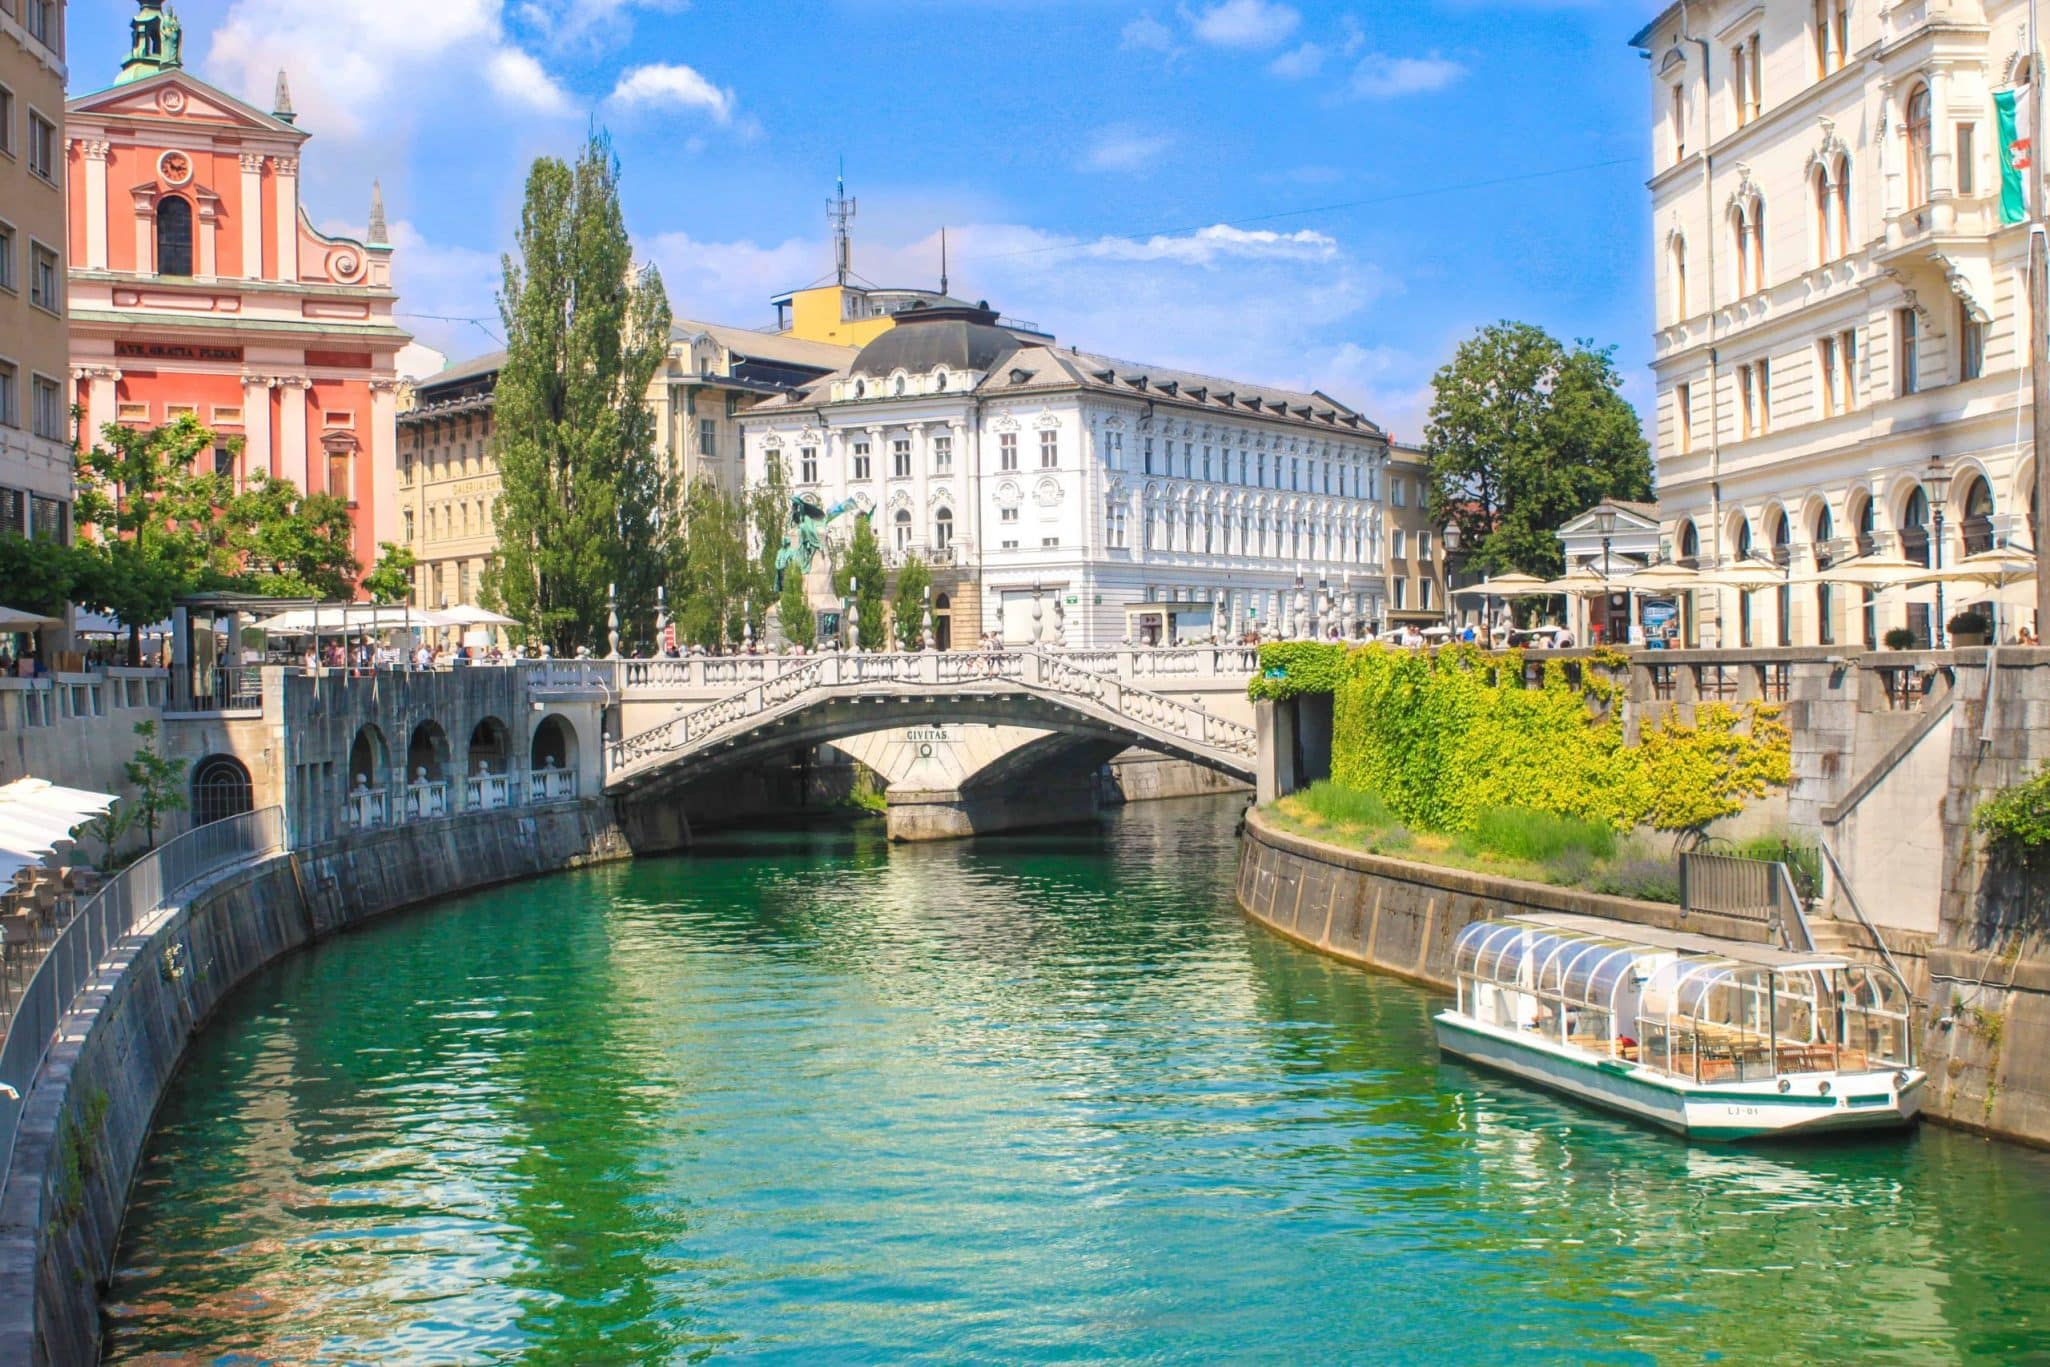 10 best things to do in Ljubljana that prove it’s way cooler than you think